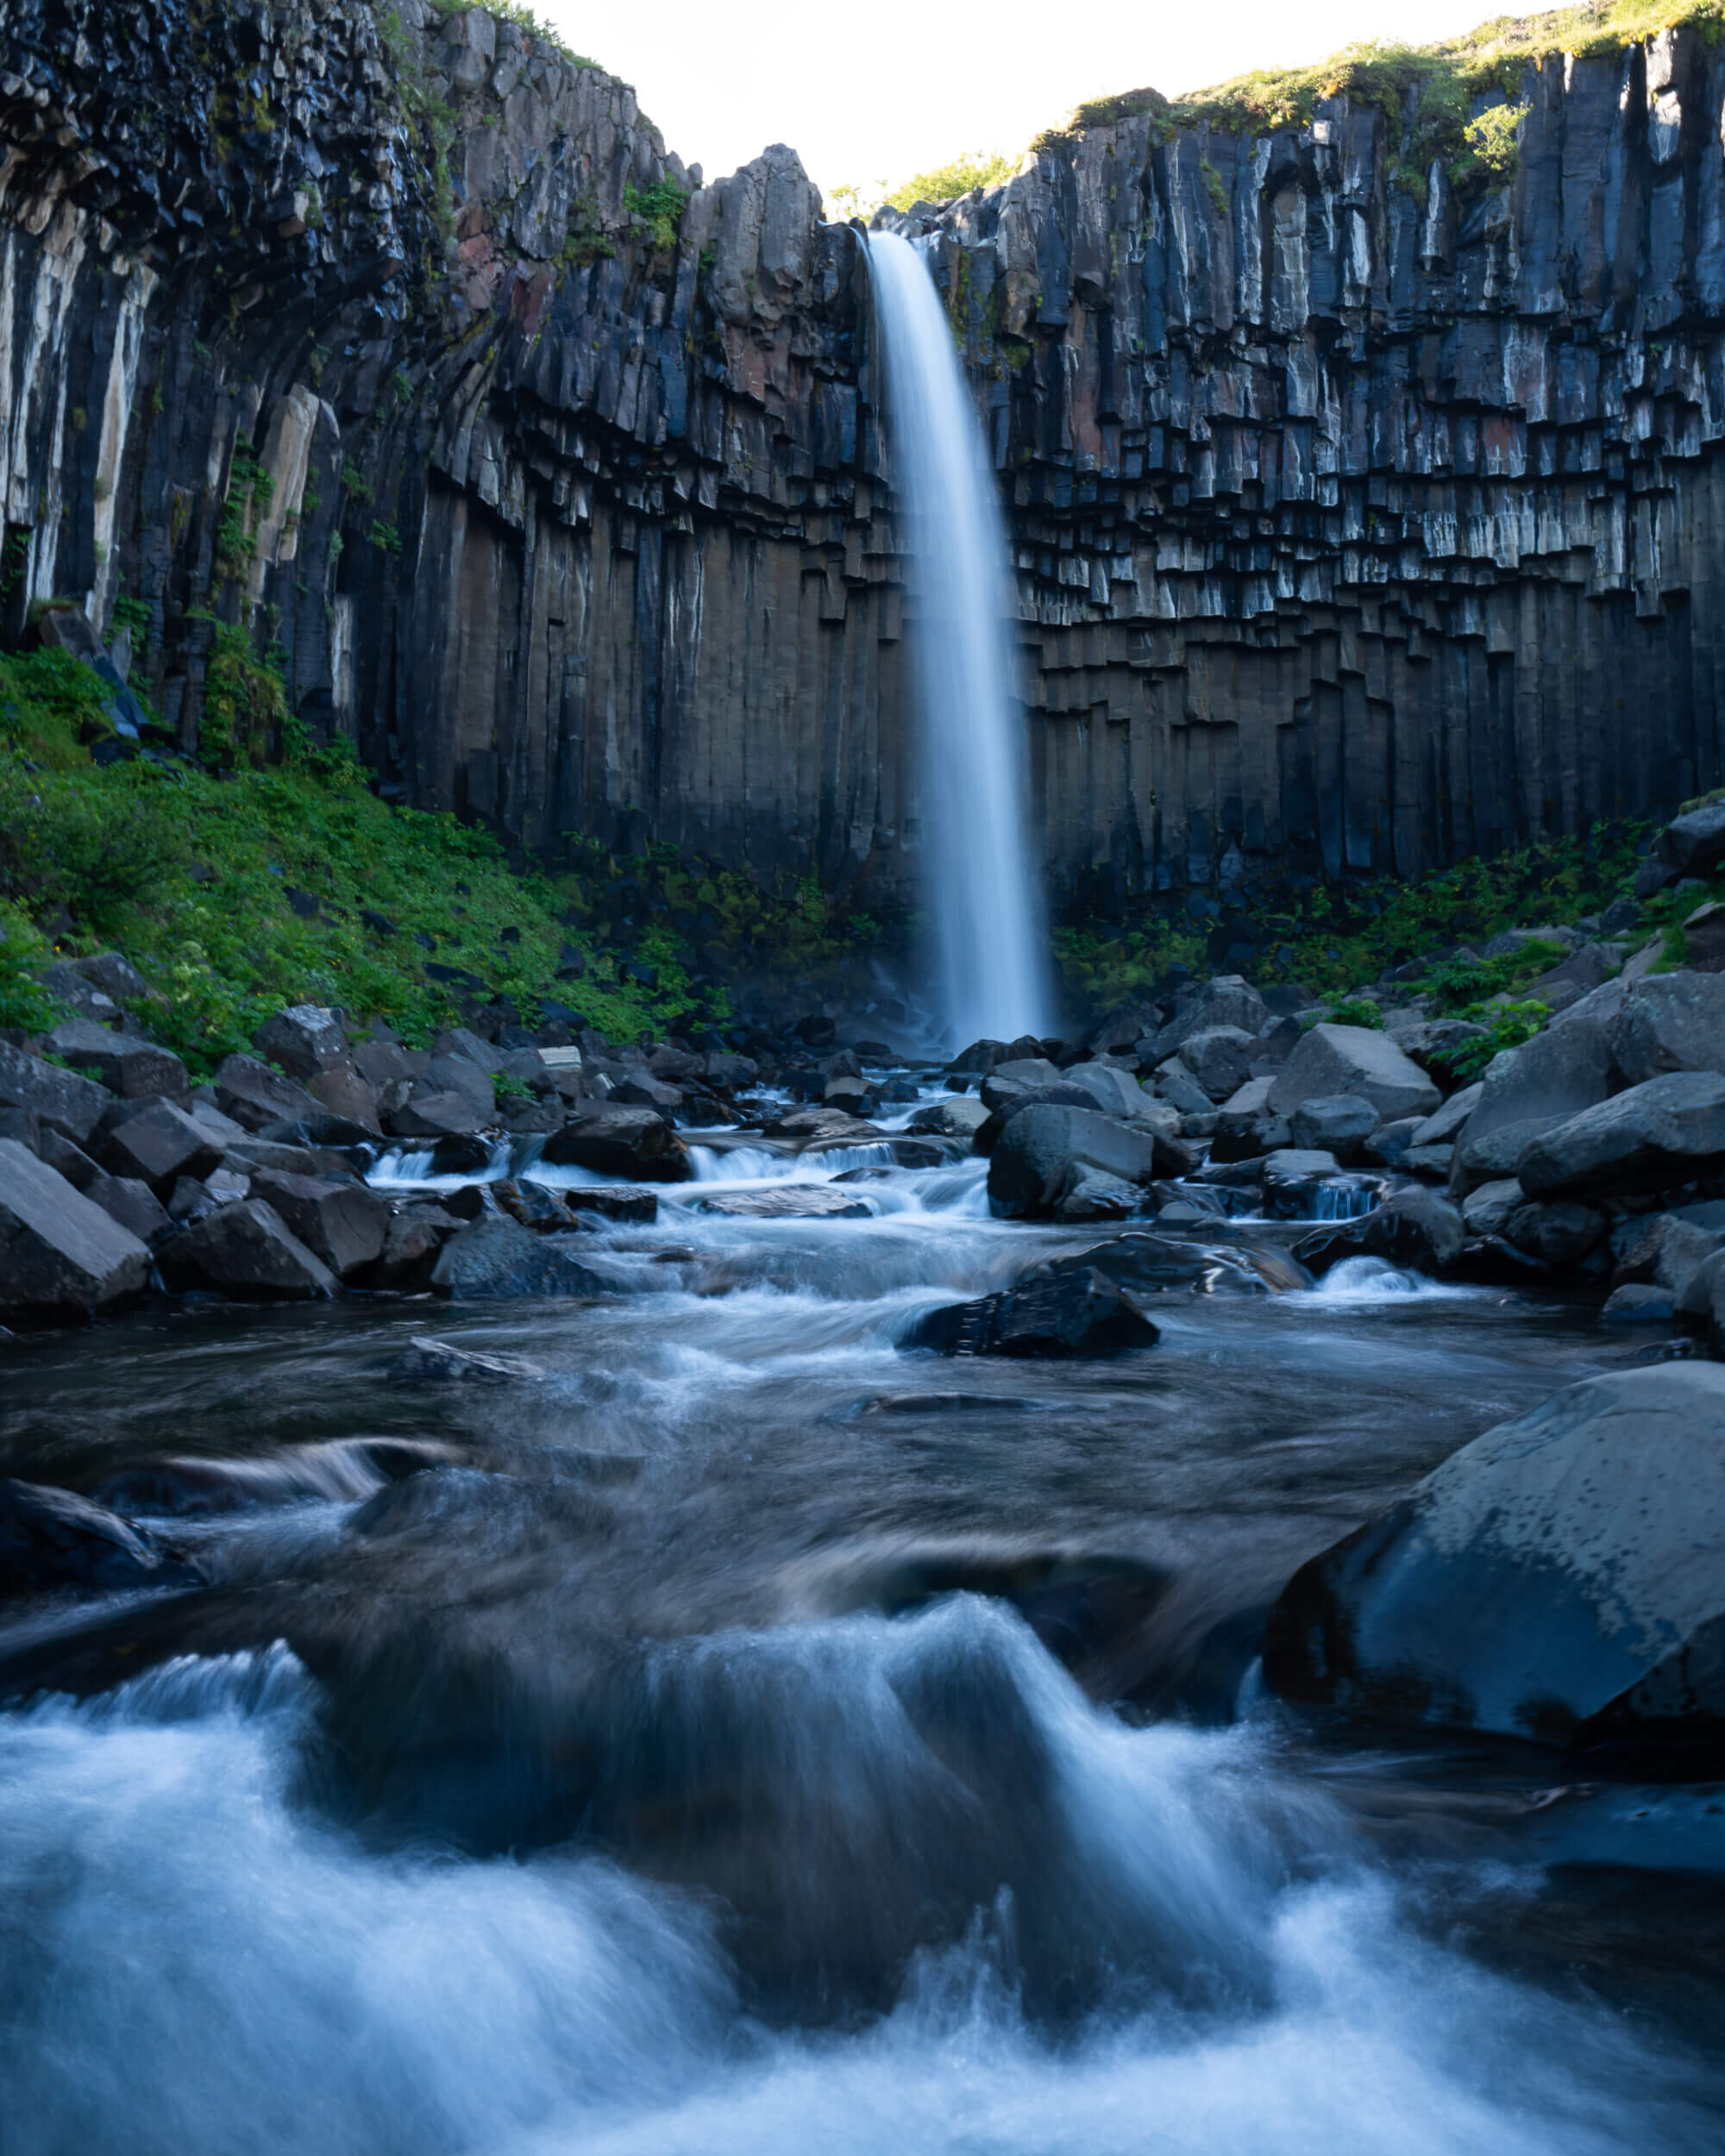 A short hike in Skaftafell National Park will take you to Svartifoss Waterfall with its famous basalt columns.